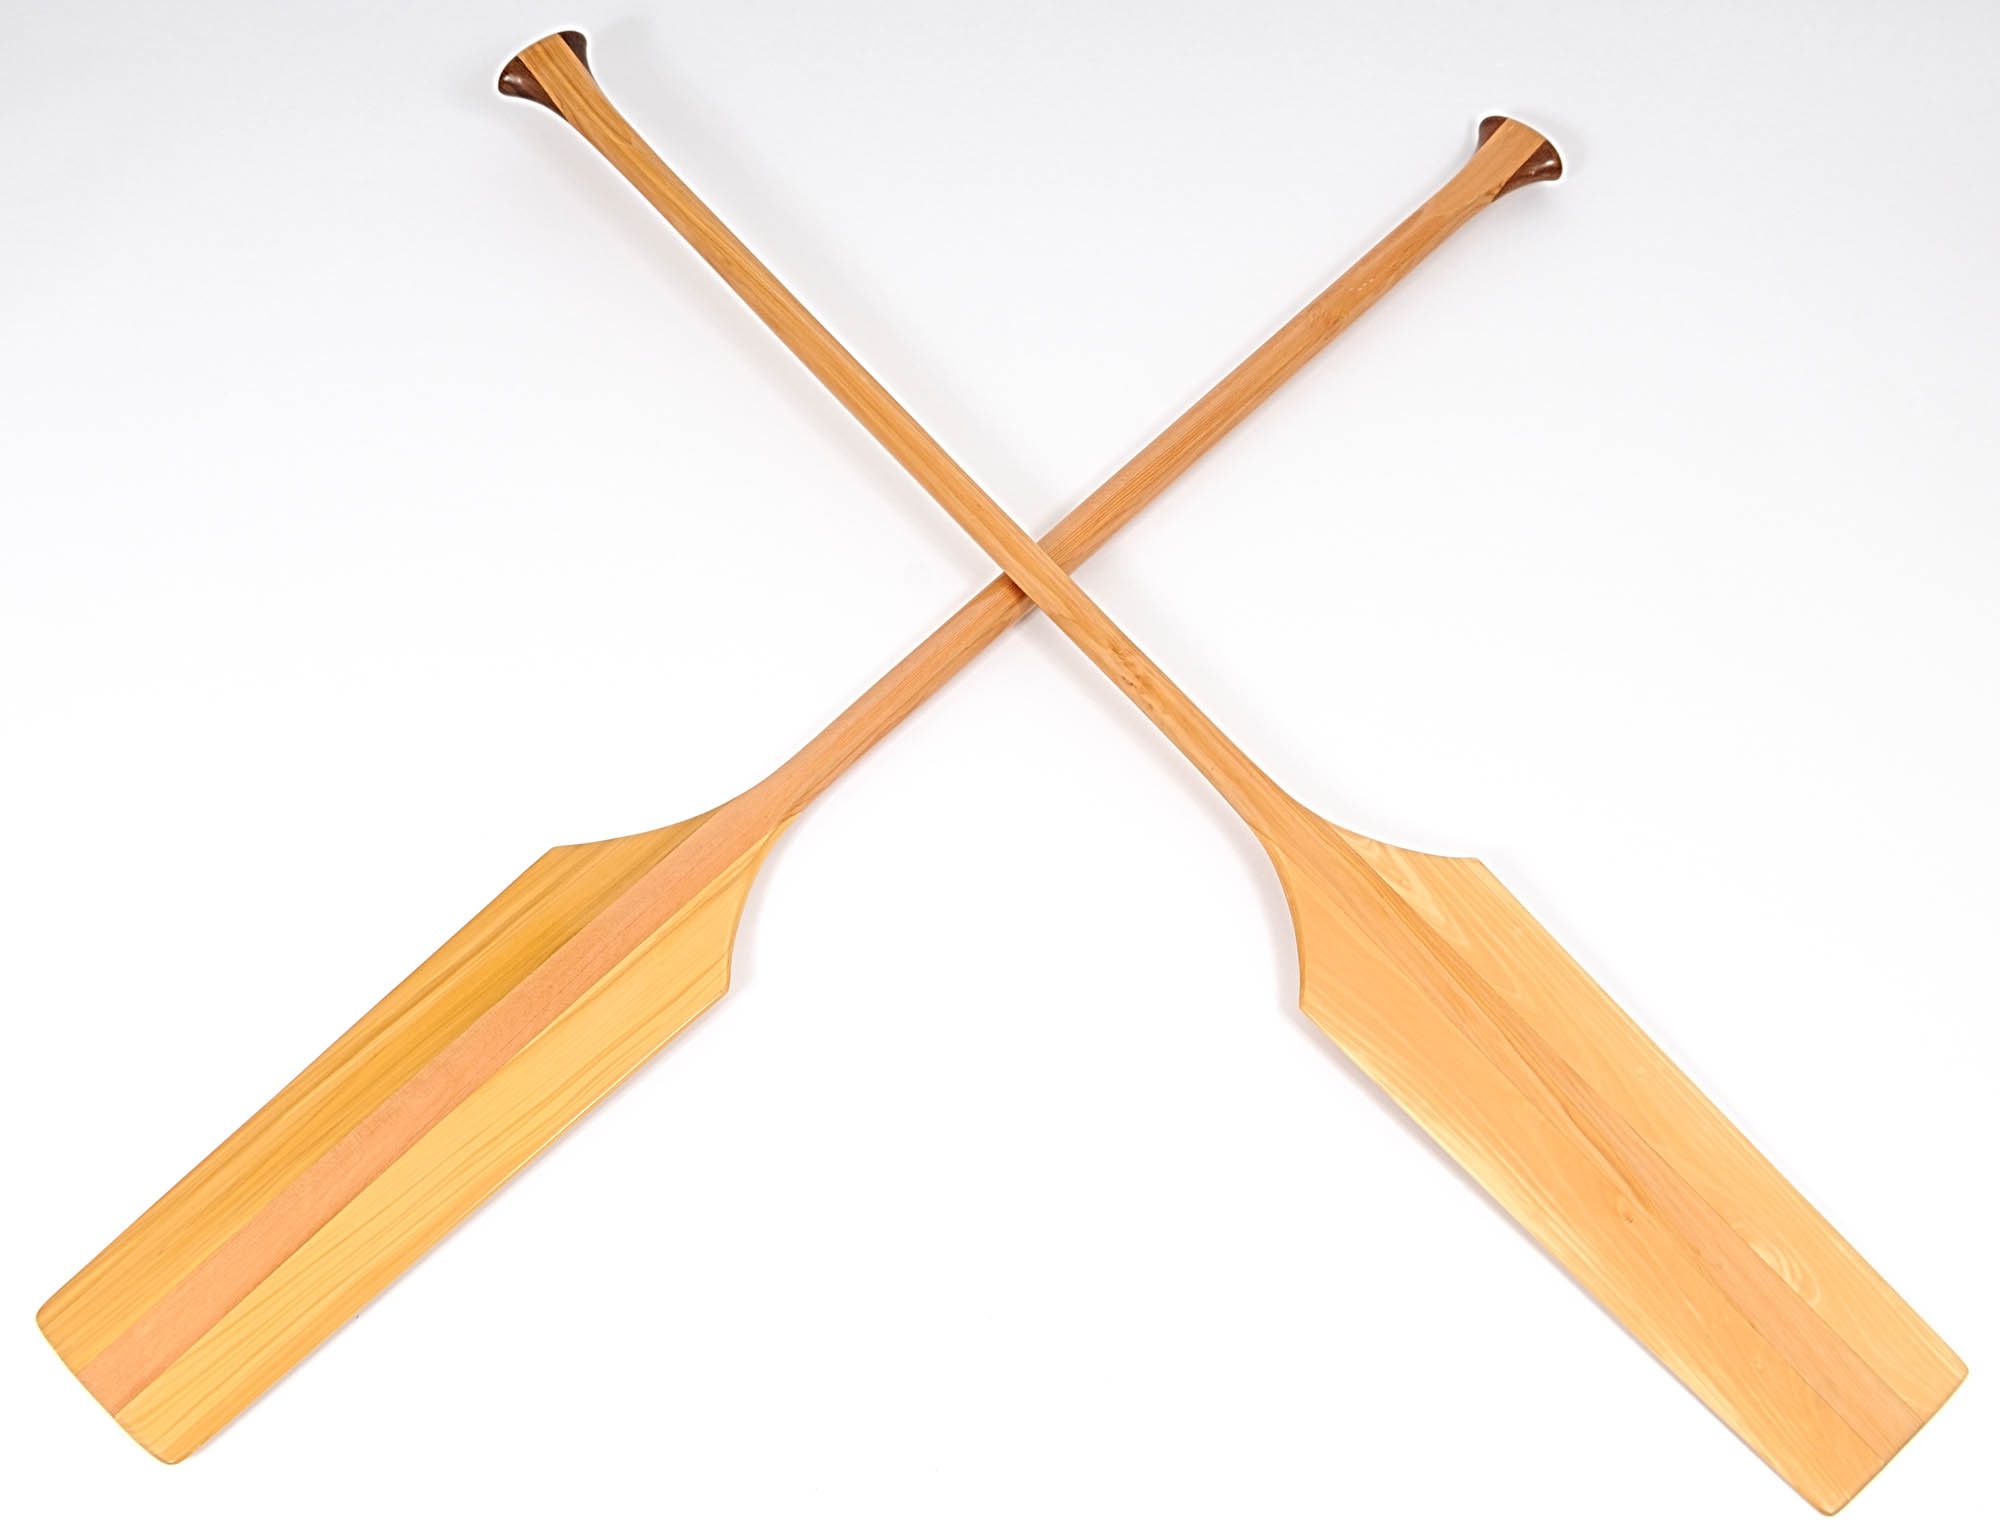 Buy Handcrafted Canoe Paddles - Wooden Boat USA